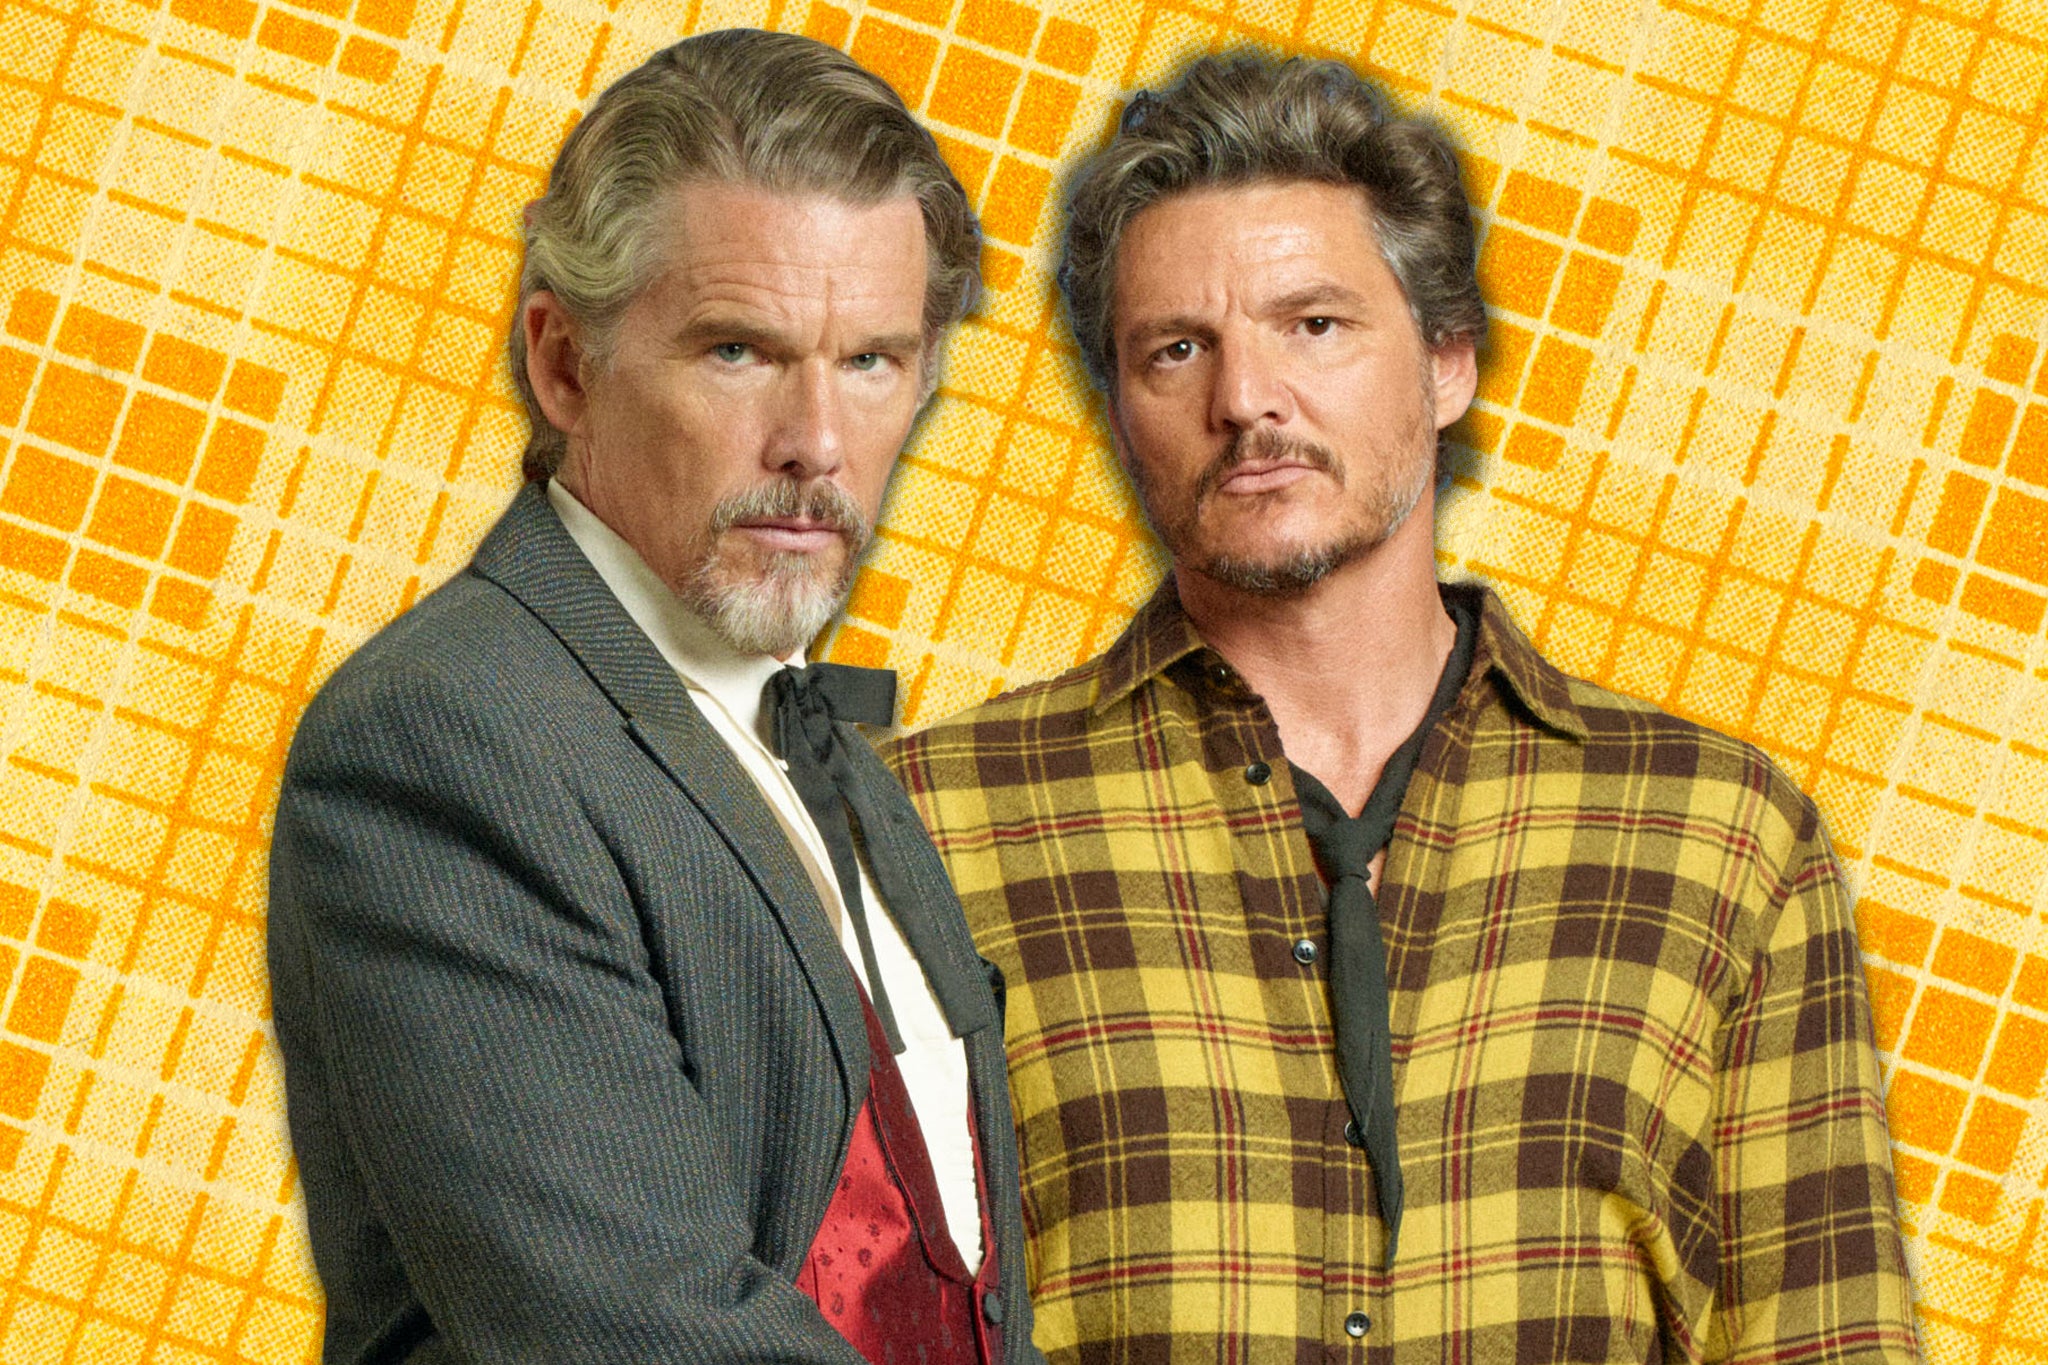 Strange new way of funding: Ethan Hawke (left) and Pedro Pascal in Pedro Almodóvar’s Saint Laurent-backed ‘Strange Way of Life’